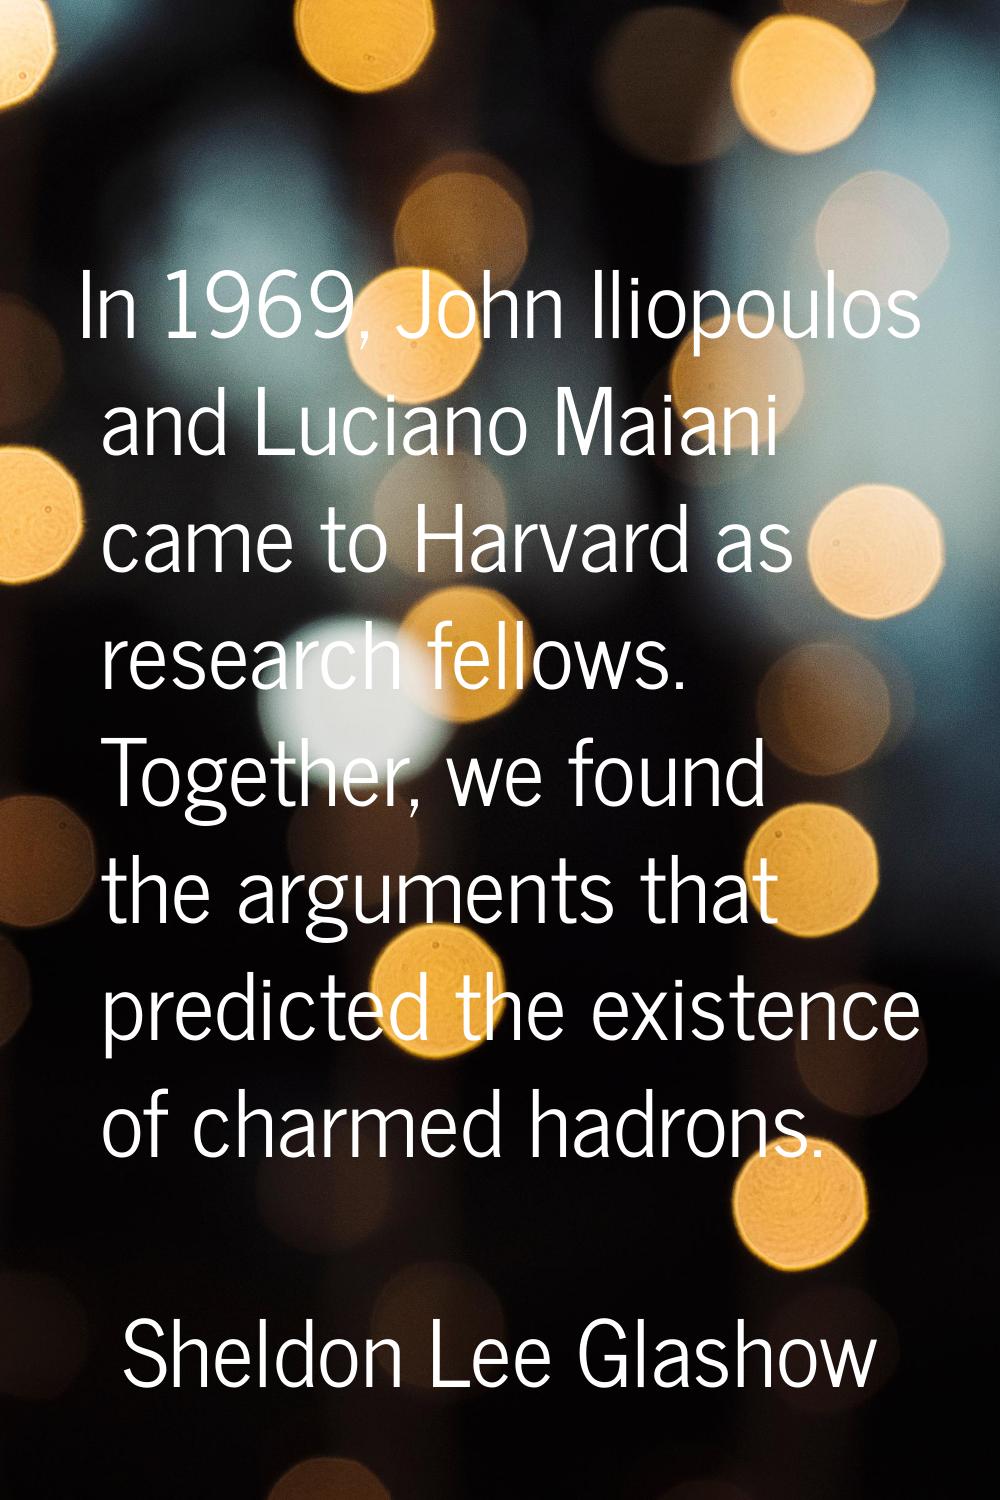 In 1969, John Iliopoulos and Luciano Maiani came to Harvard as research fellows. Together, we found